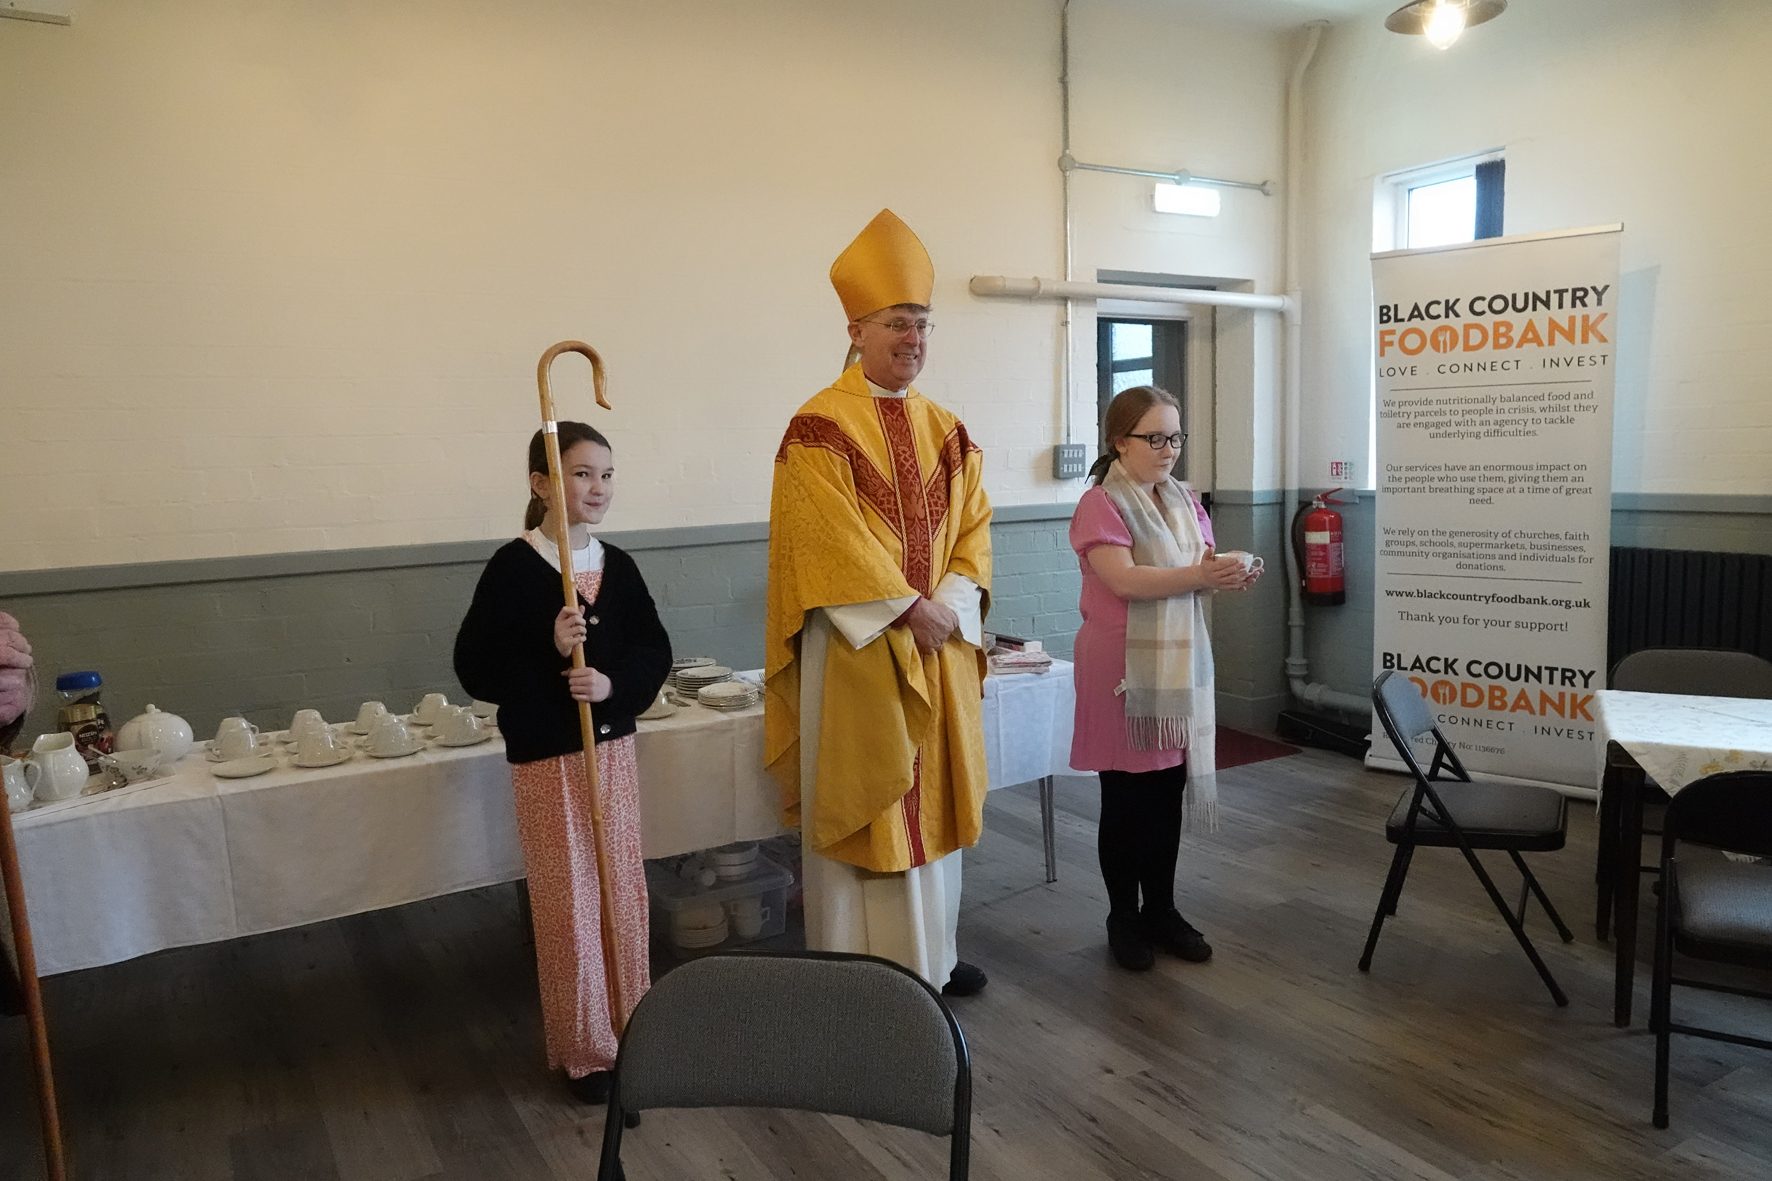 Bishop Martin standing with two younger members of st John's congregation as he blesses the new foodbank